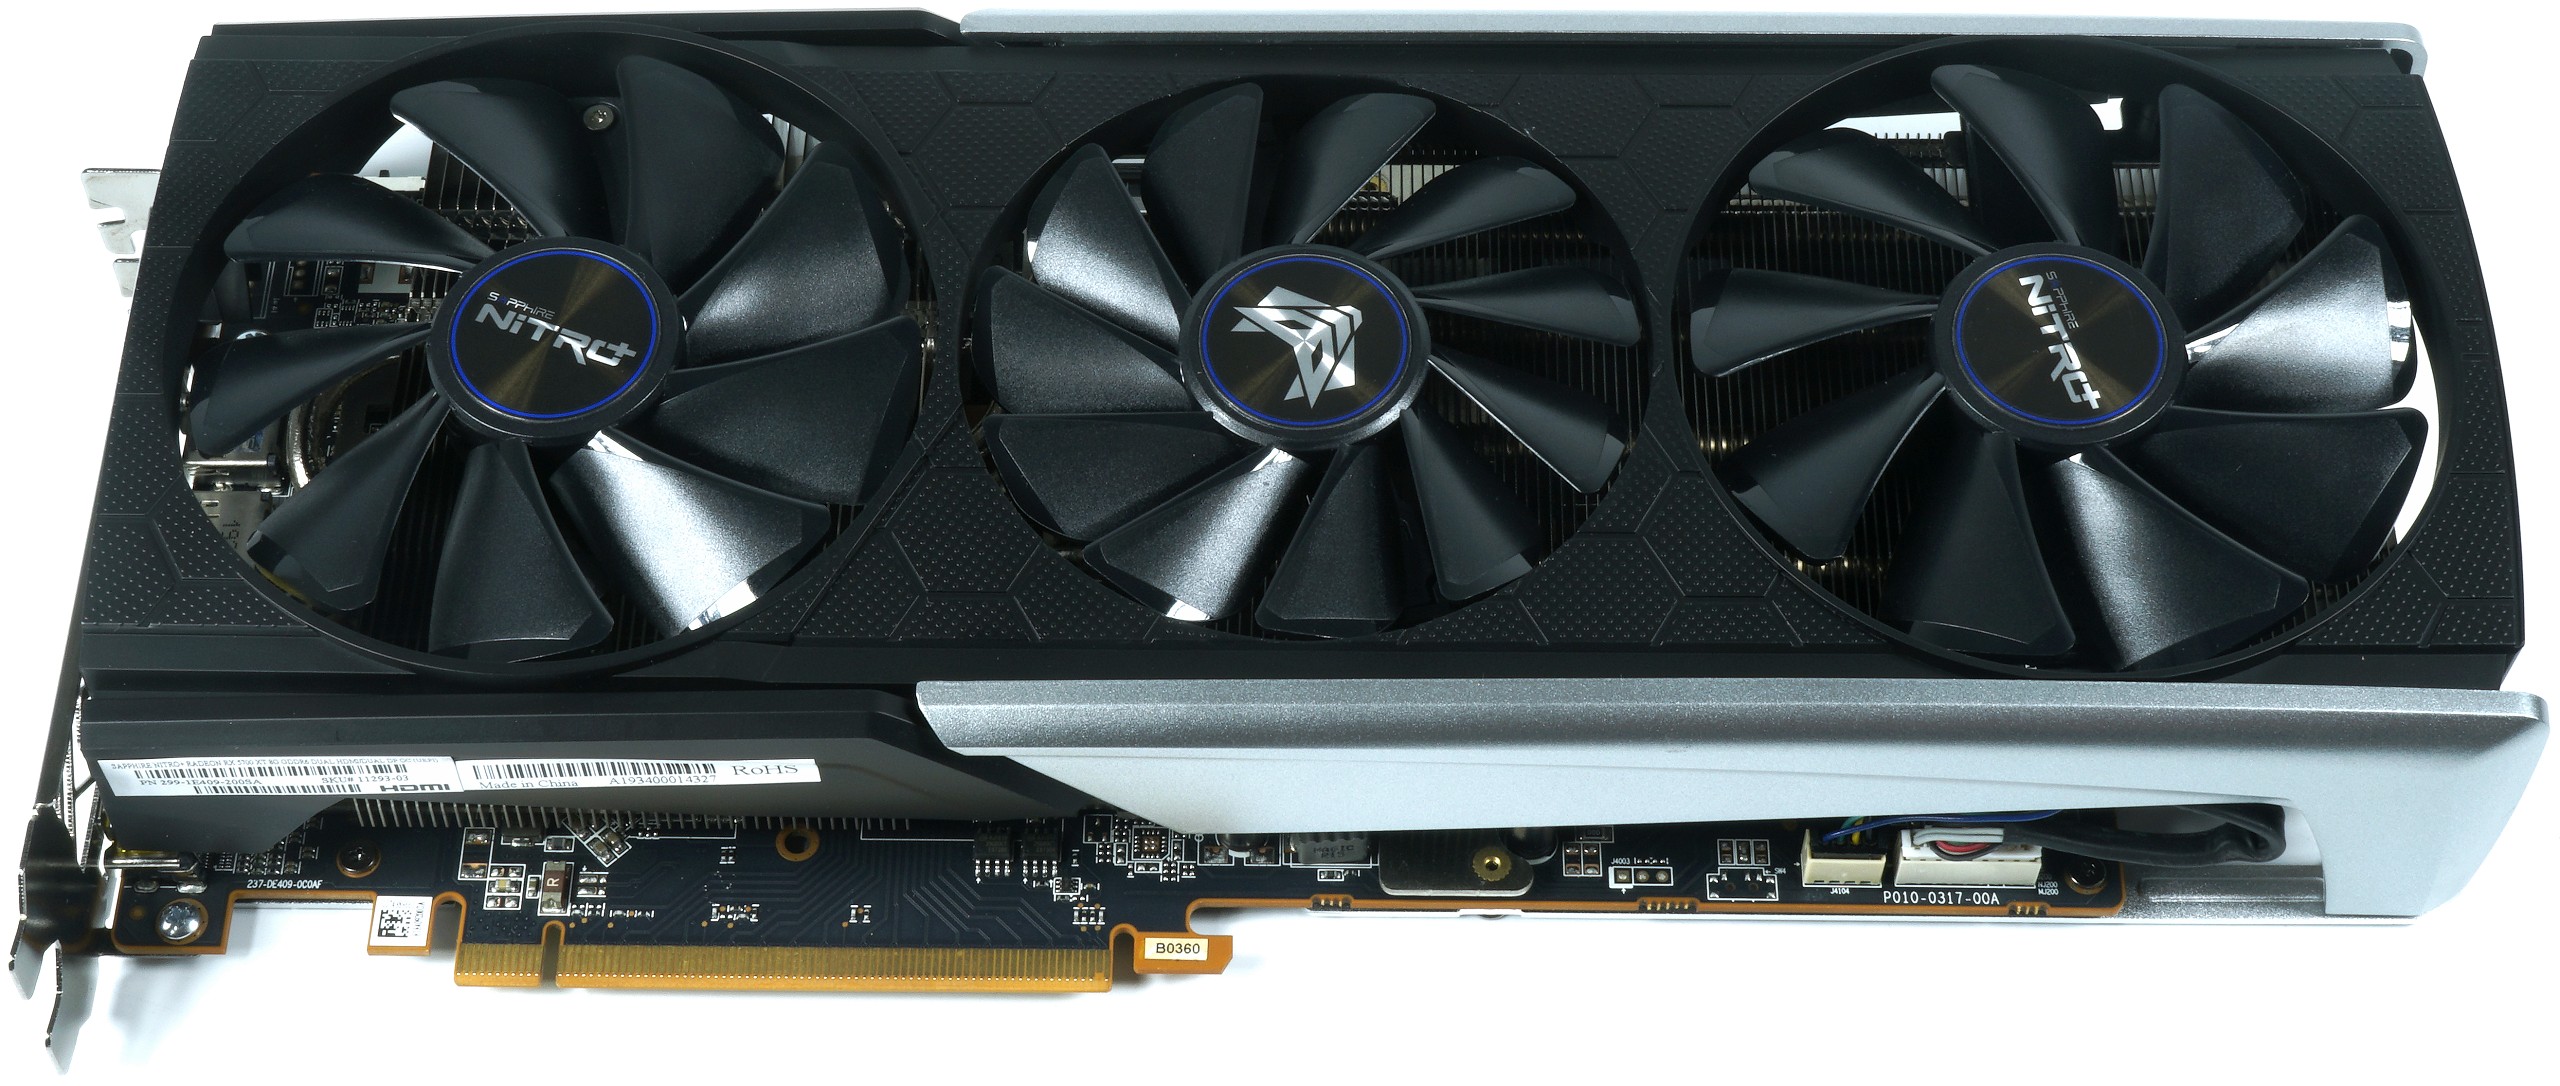 Sapphire RX 5700 XT Nitro Plus in test - sprinting better with